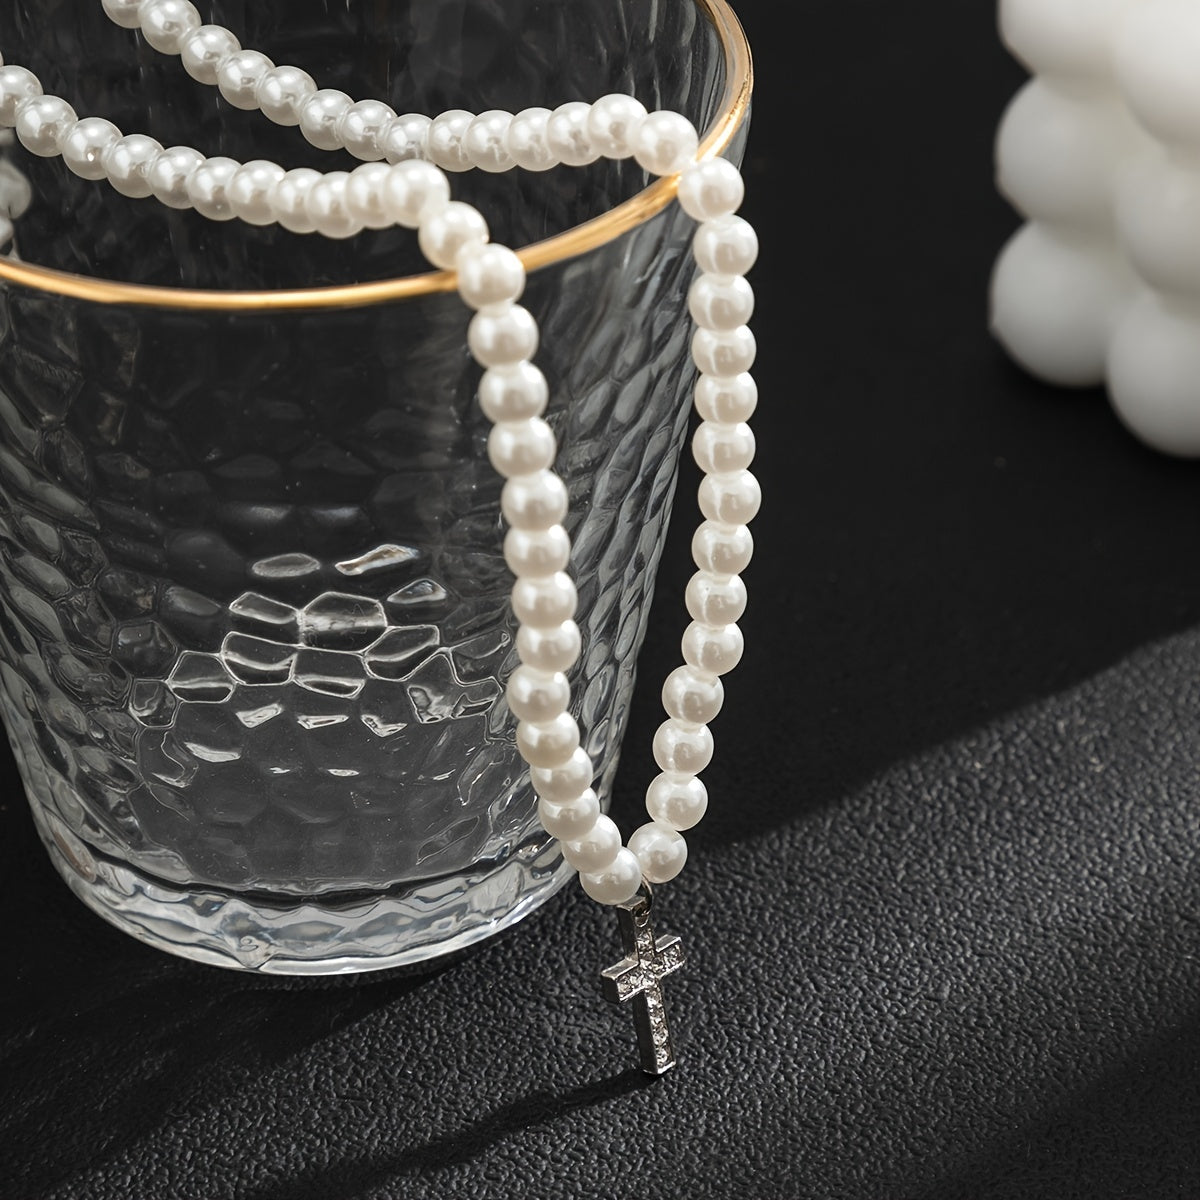 Add a touch of elegance to your outfit with our Men's Artificial Diamond Cross Pendant Pearl Necklace